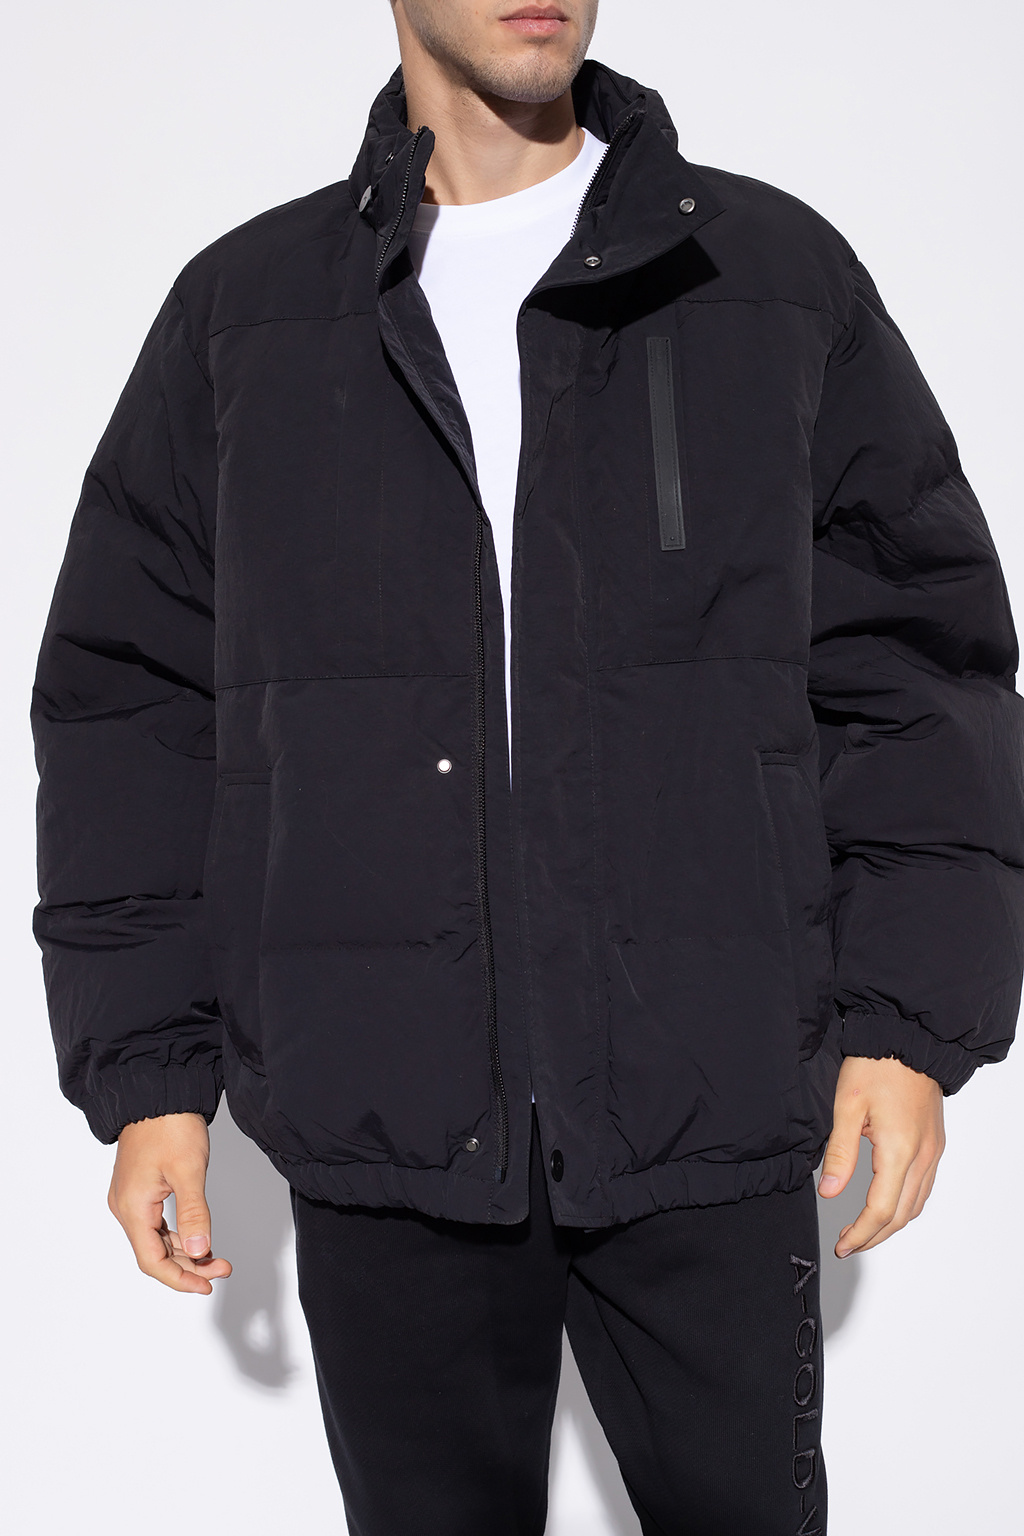 A-COLD-WALL* Down jacket with collar | Men's Clothing | Vitkac